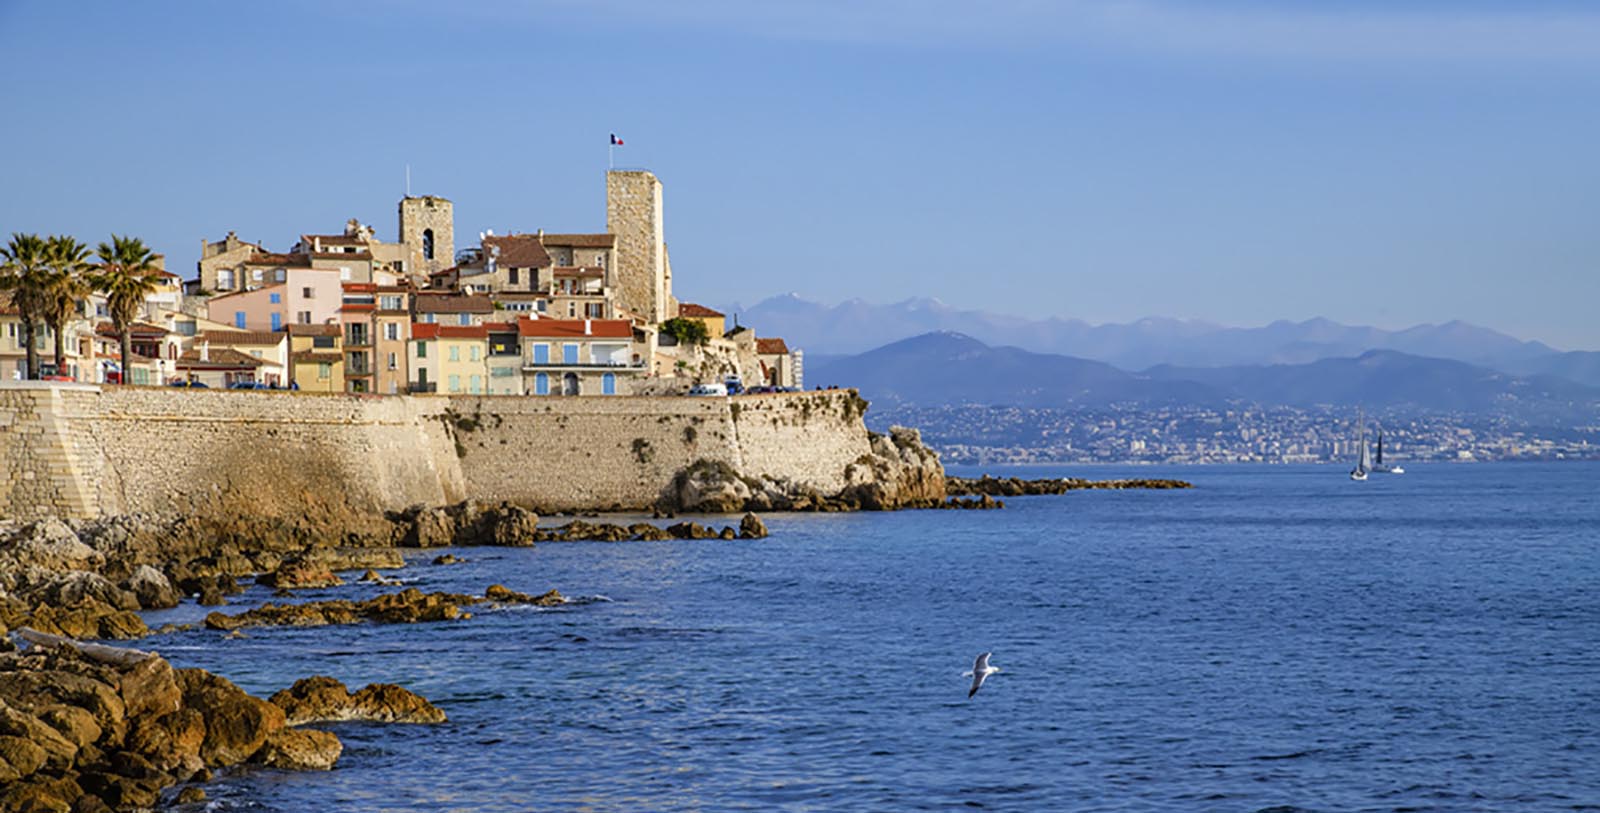 Experience the breathtaking coastline that is the French Riviera, specifically Cap d’Antibes.